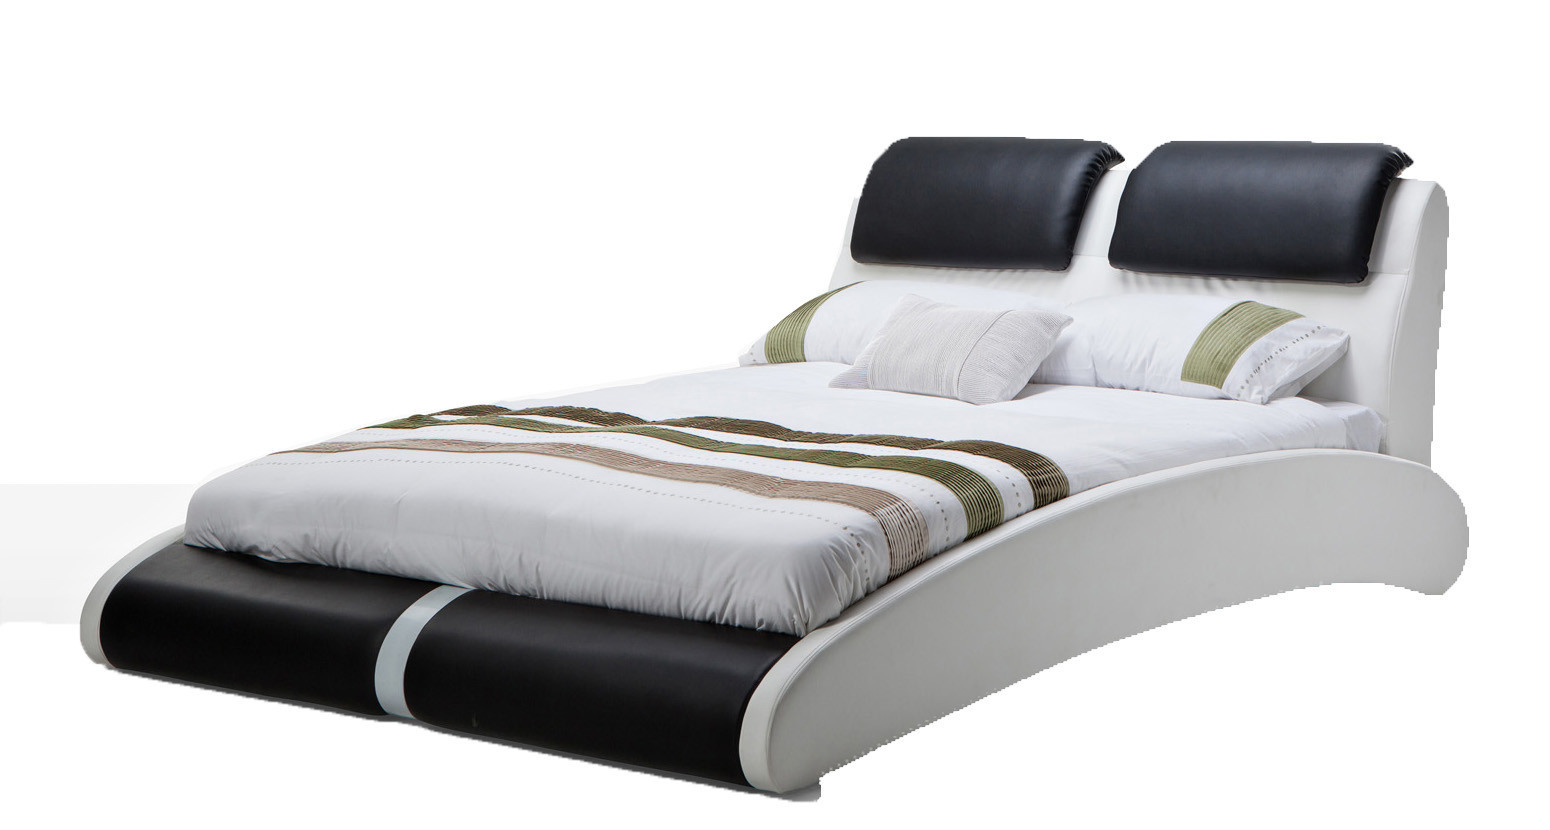 Pluto Queen Bed In Black And White